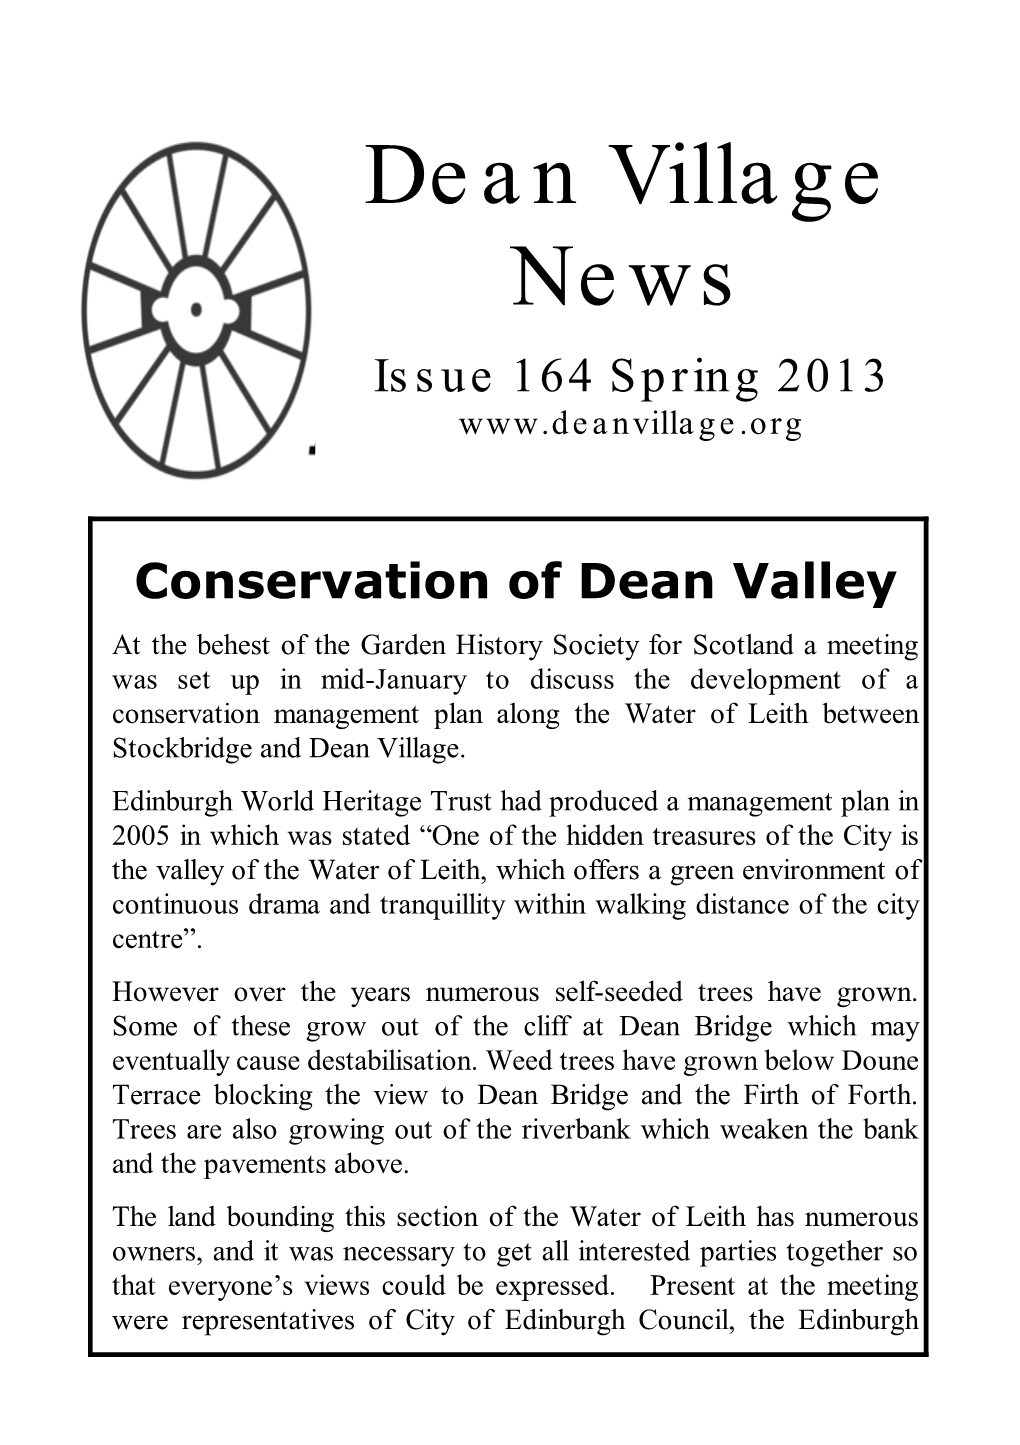 Issue 164: Spring 2013